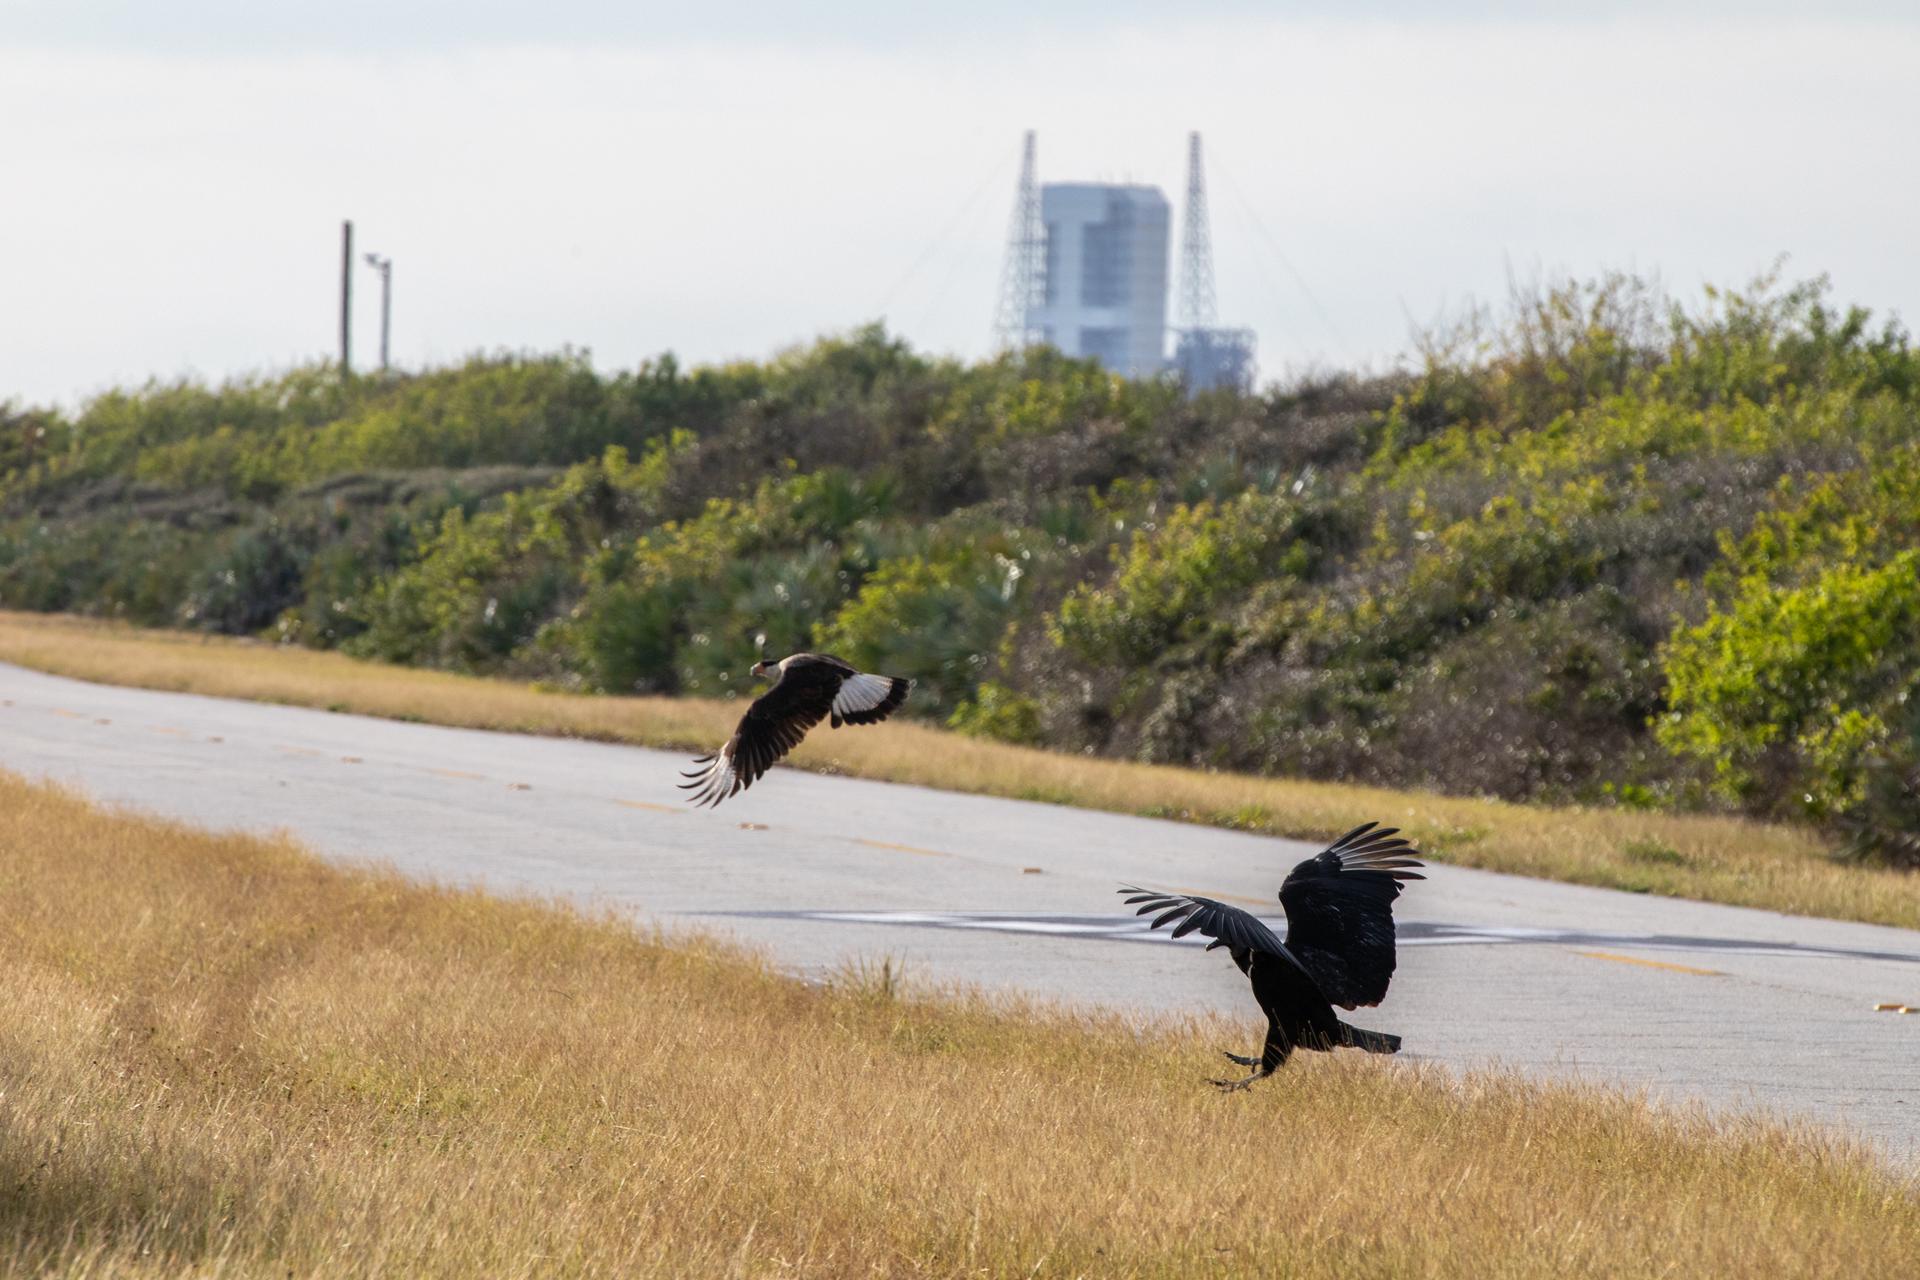 An adult crested caracara, left, and a vulture swoop down near the roadway at NASA’s Kennedy Space Center in Florida.